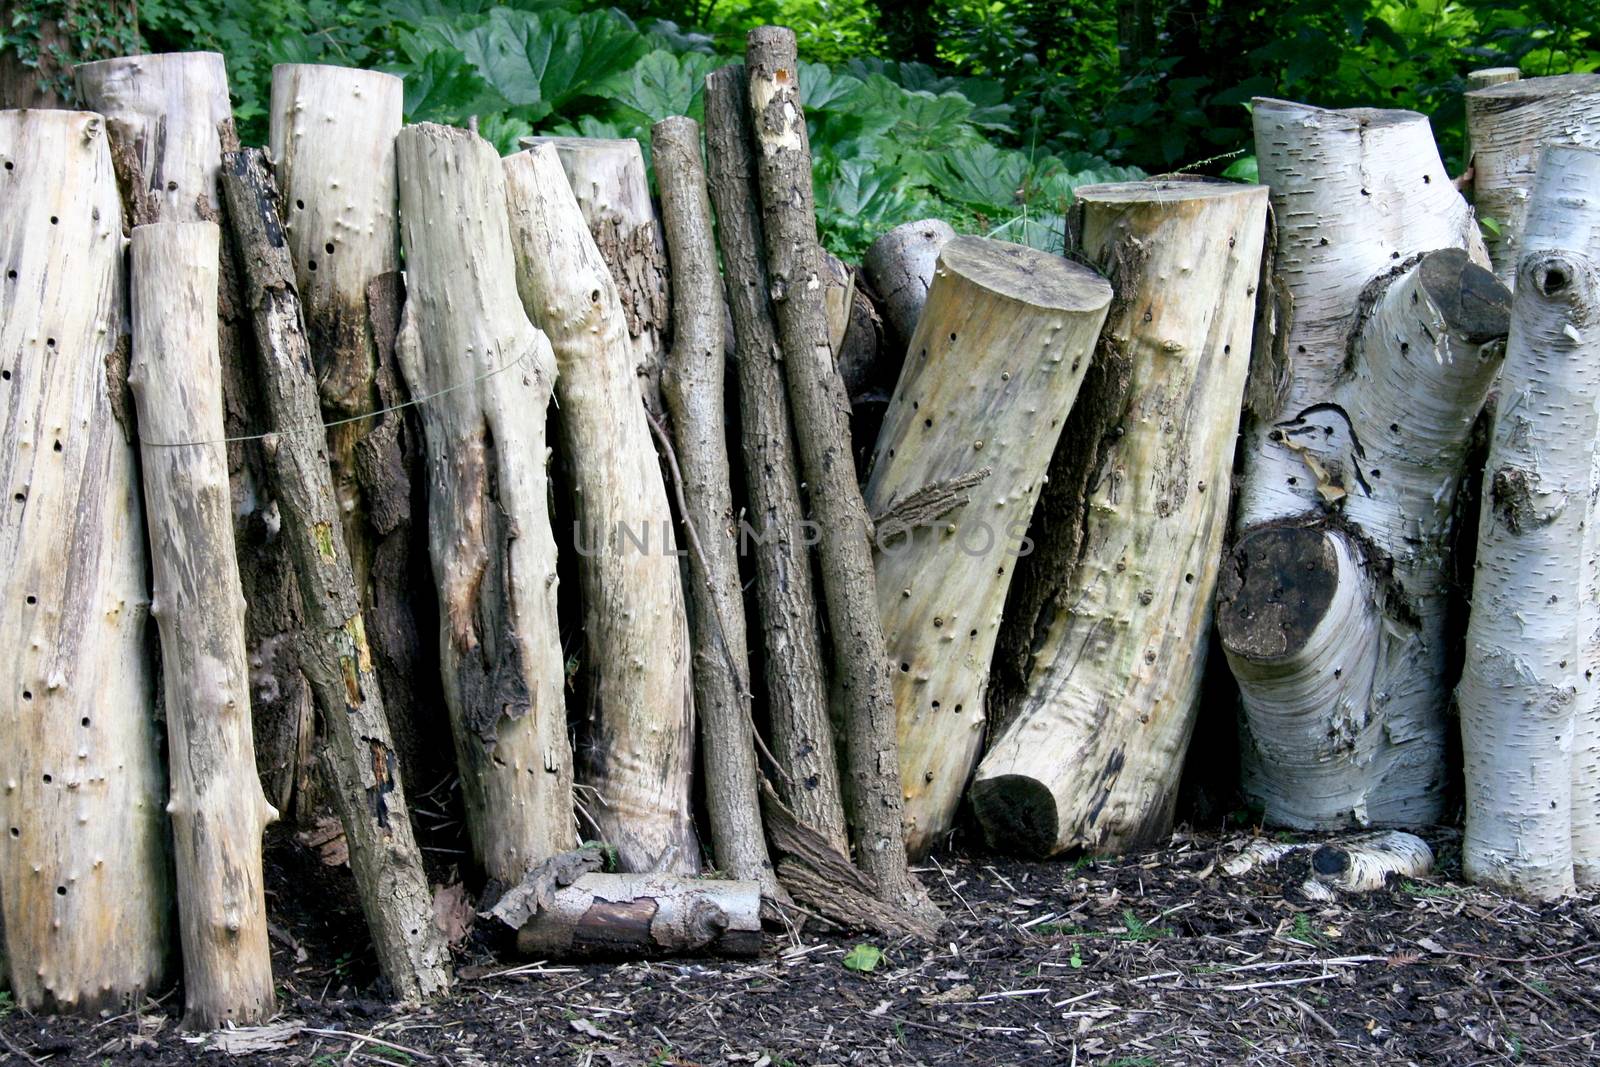 Some larger number of stored standing tree trunks